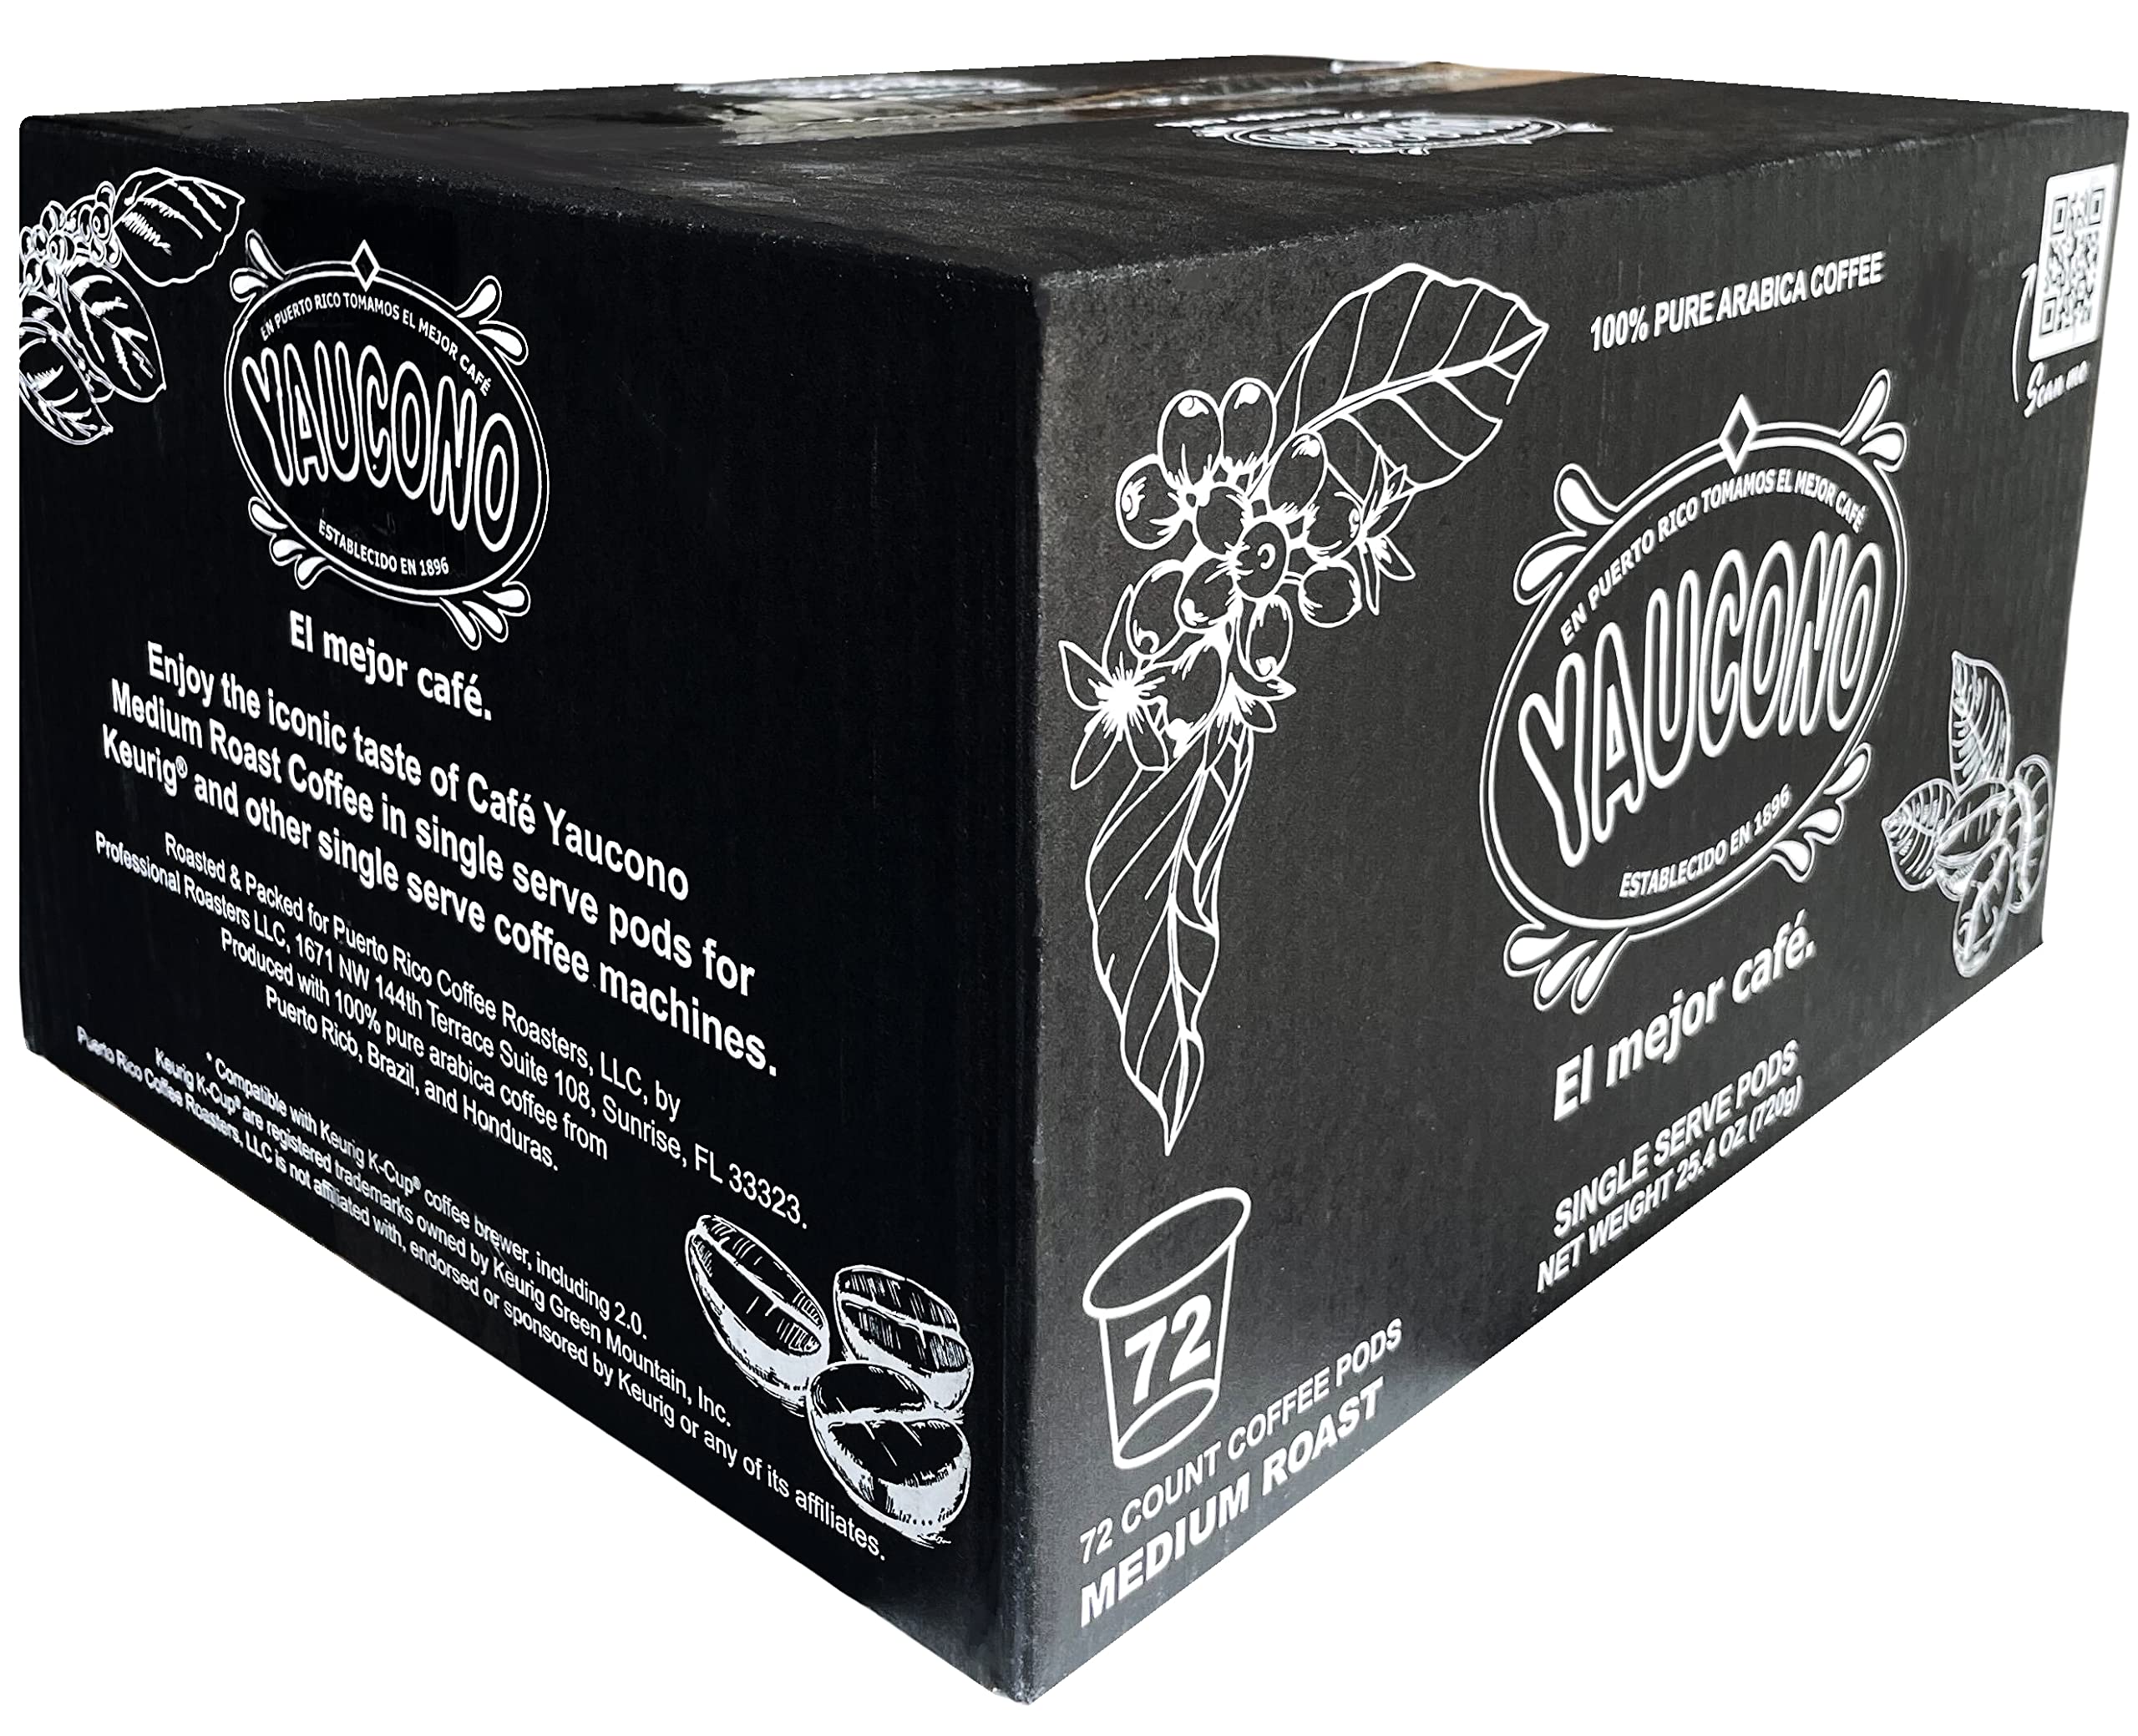 Yaucono Ground Medium Roast Arabica Coffee Single-Serve Pods, 72 Count, Compatible with Keurig K Cup Brewers